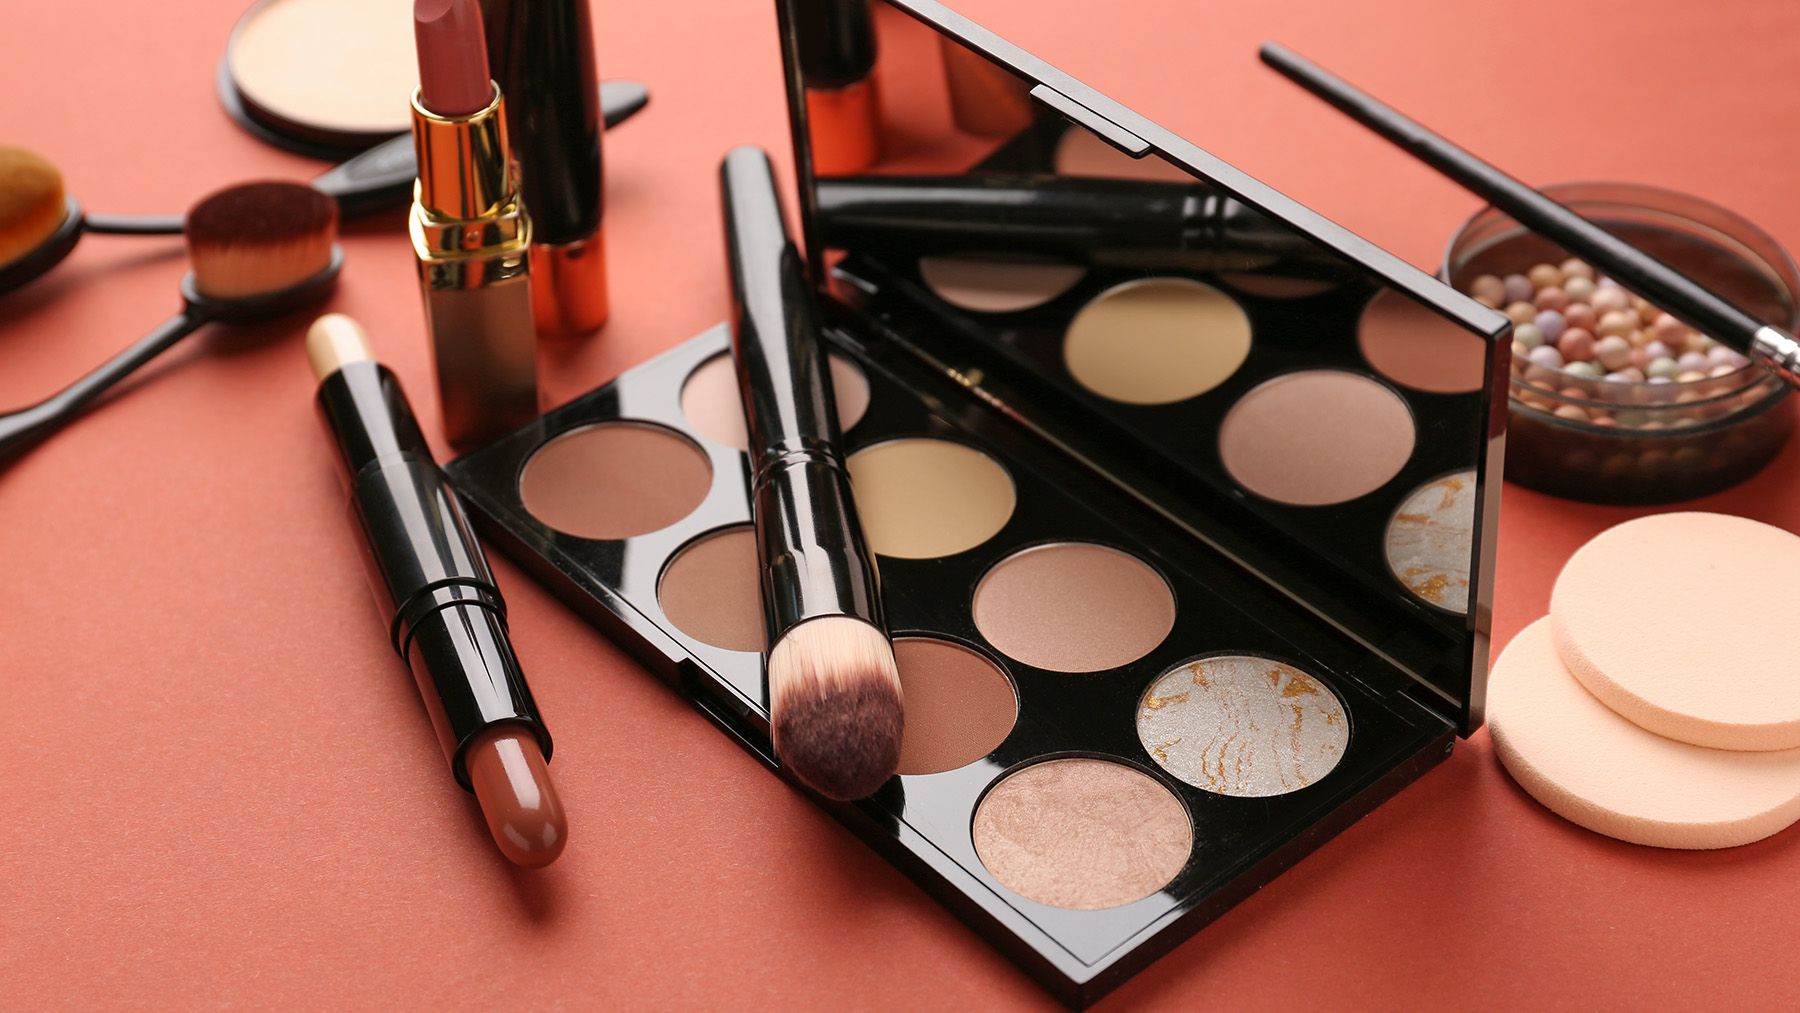 France Wants to Work With China on Joint Standards for Cosmetics